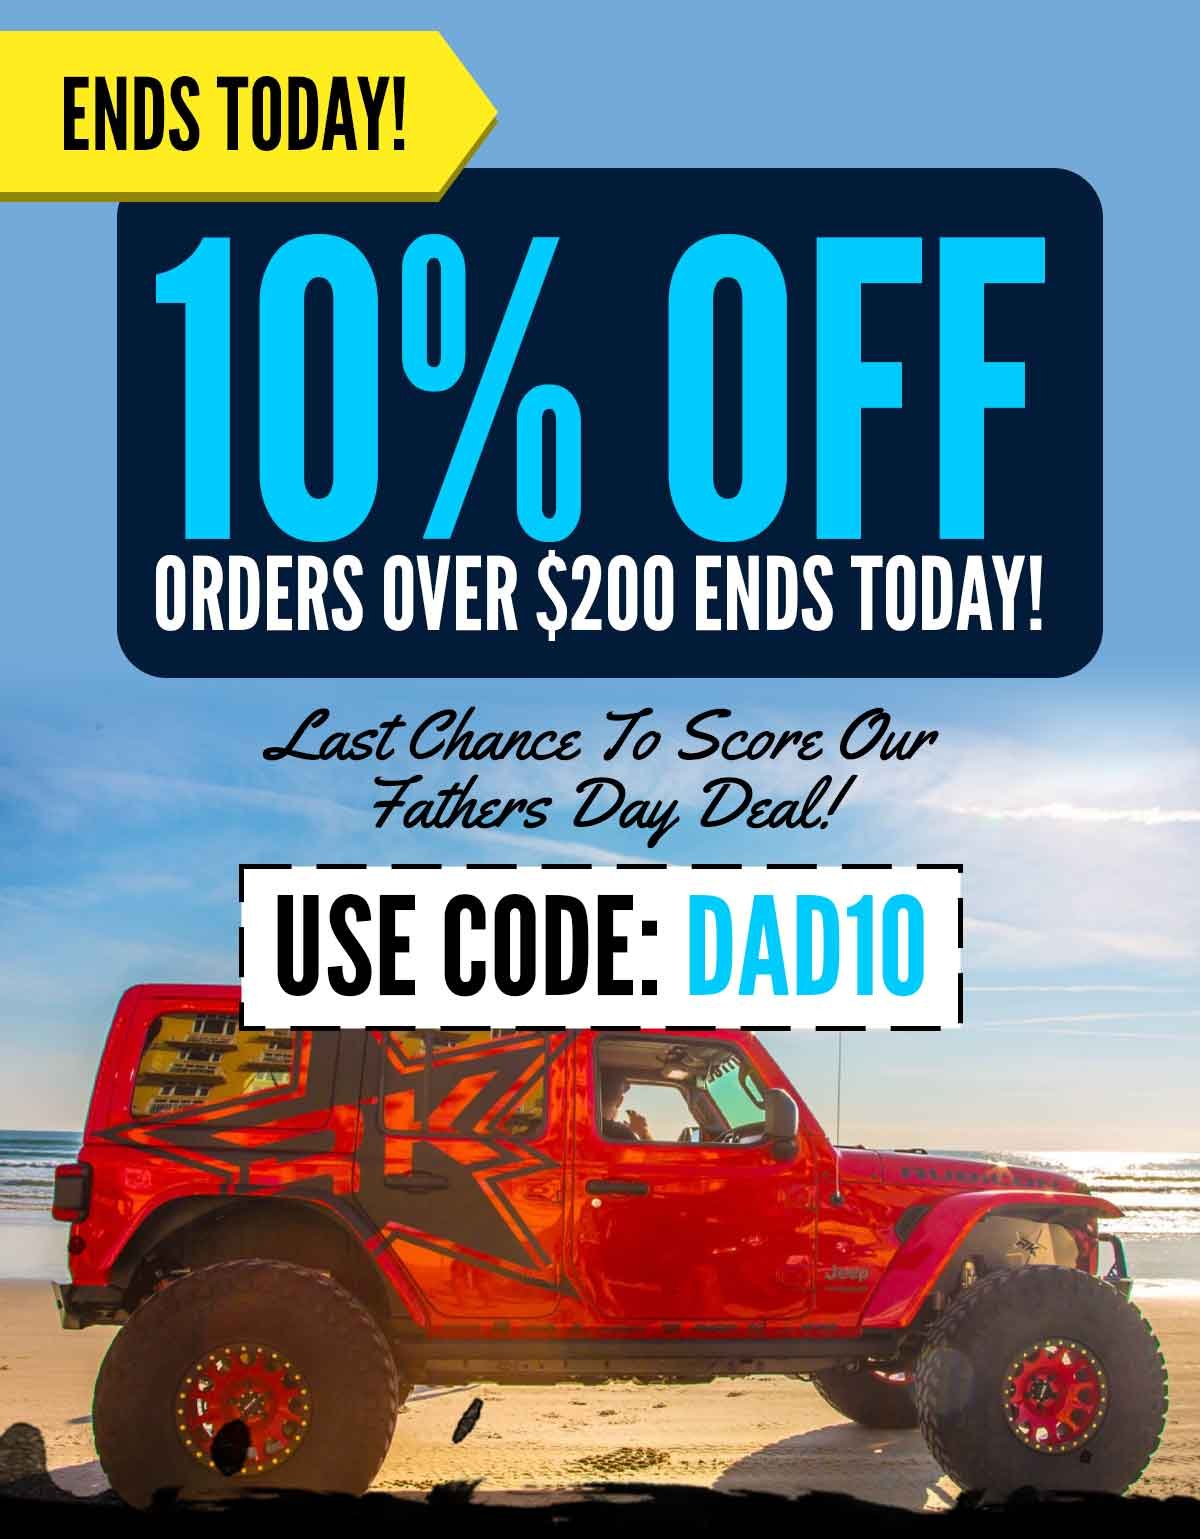 10% Off Orders Over $200 Ends Today! Last Chance To Score Our Fathers Day Deal! Use Code: DAD10